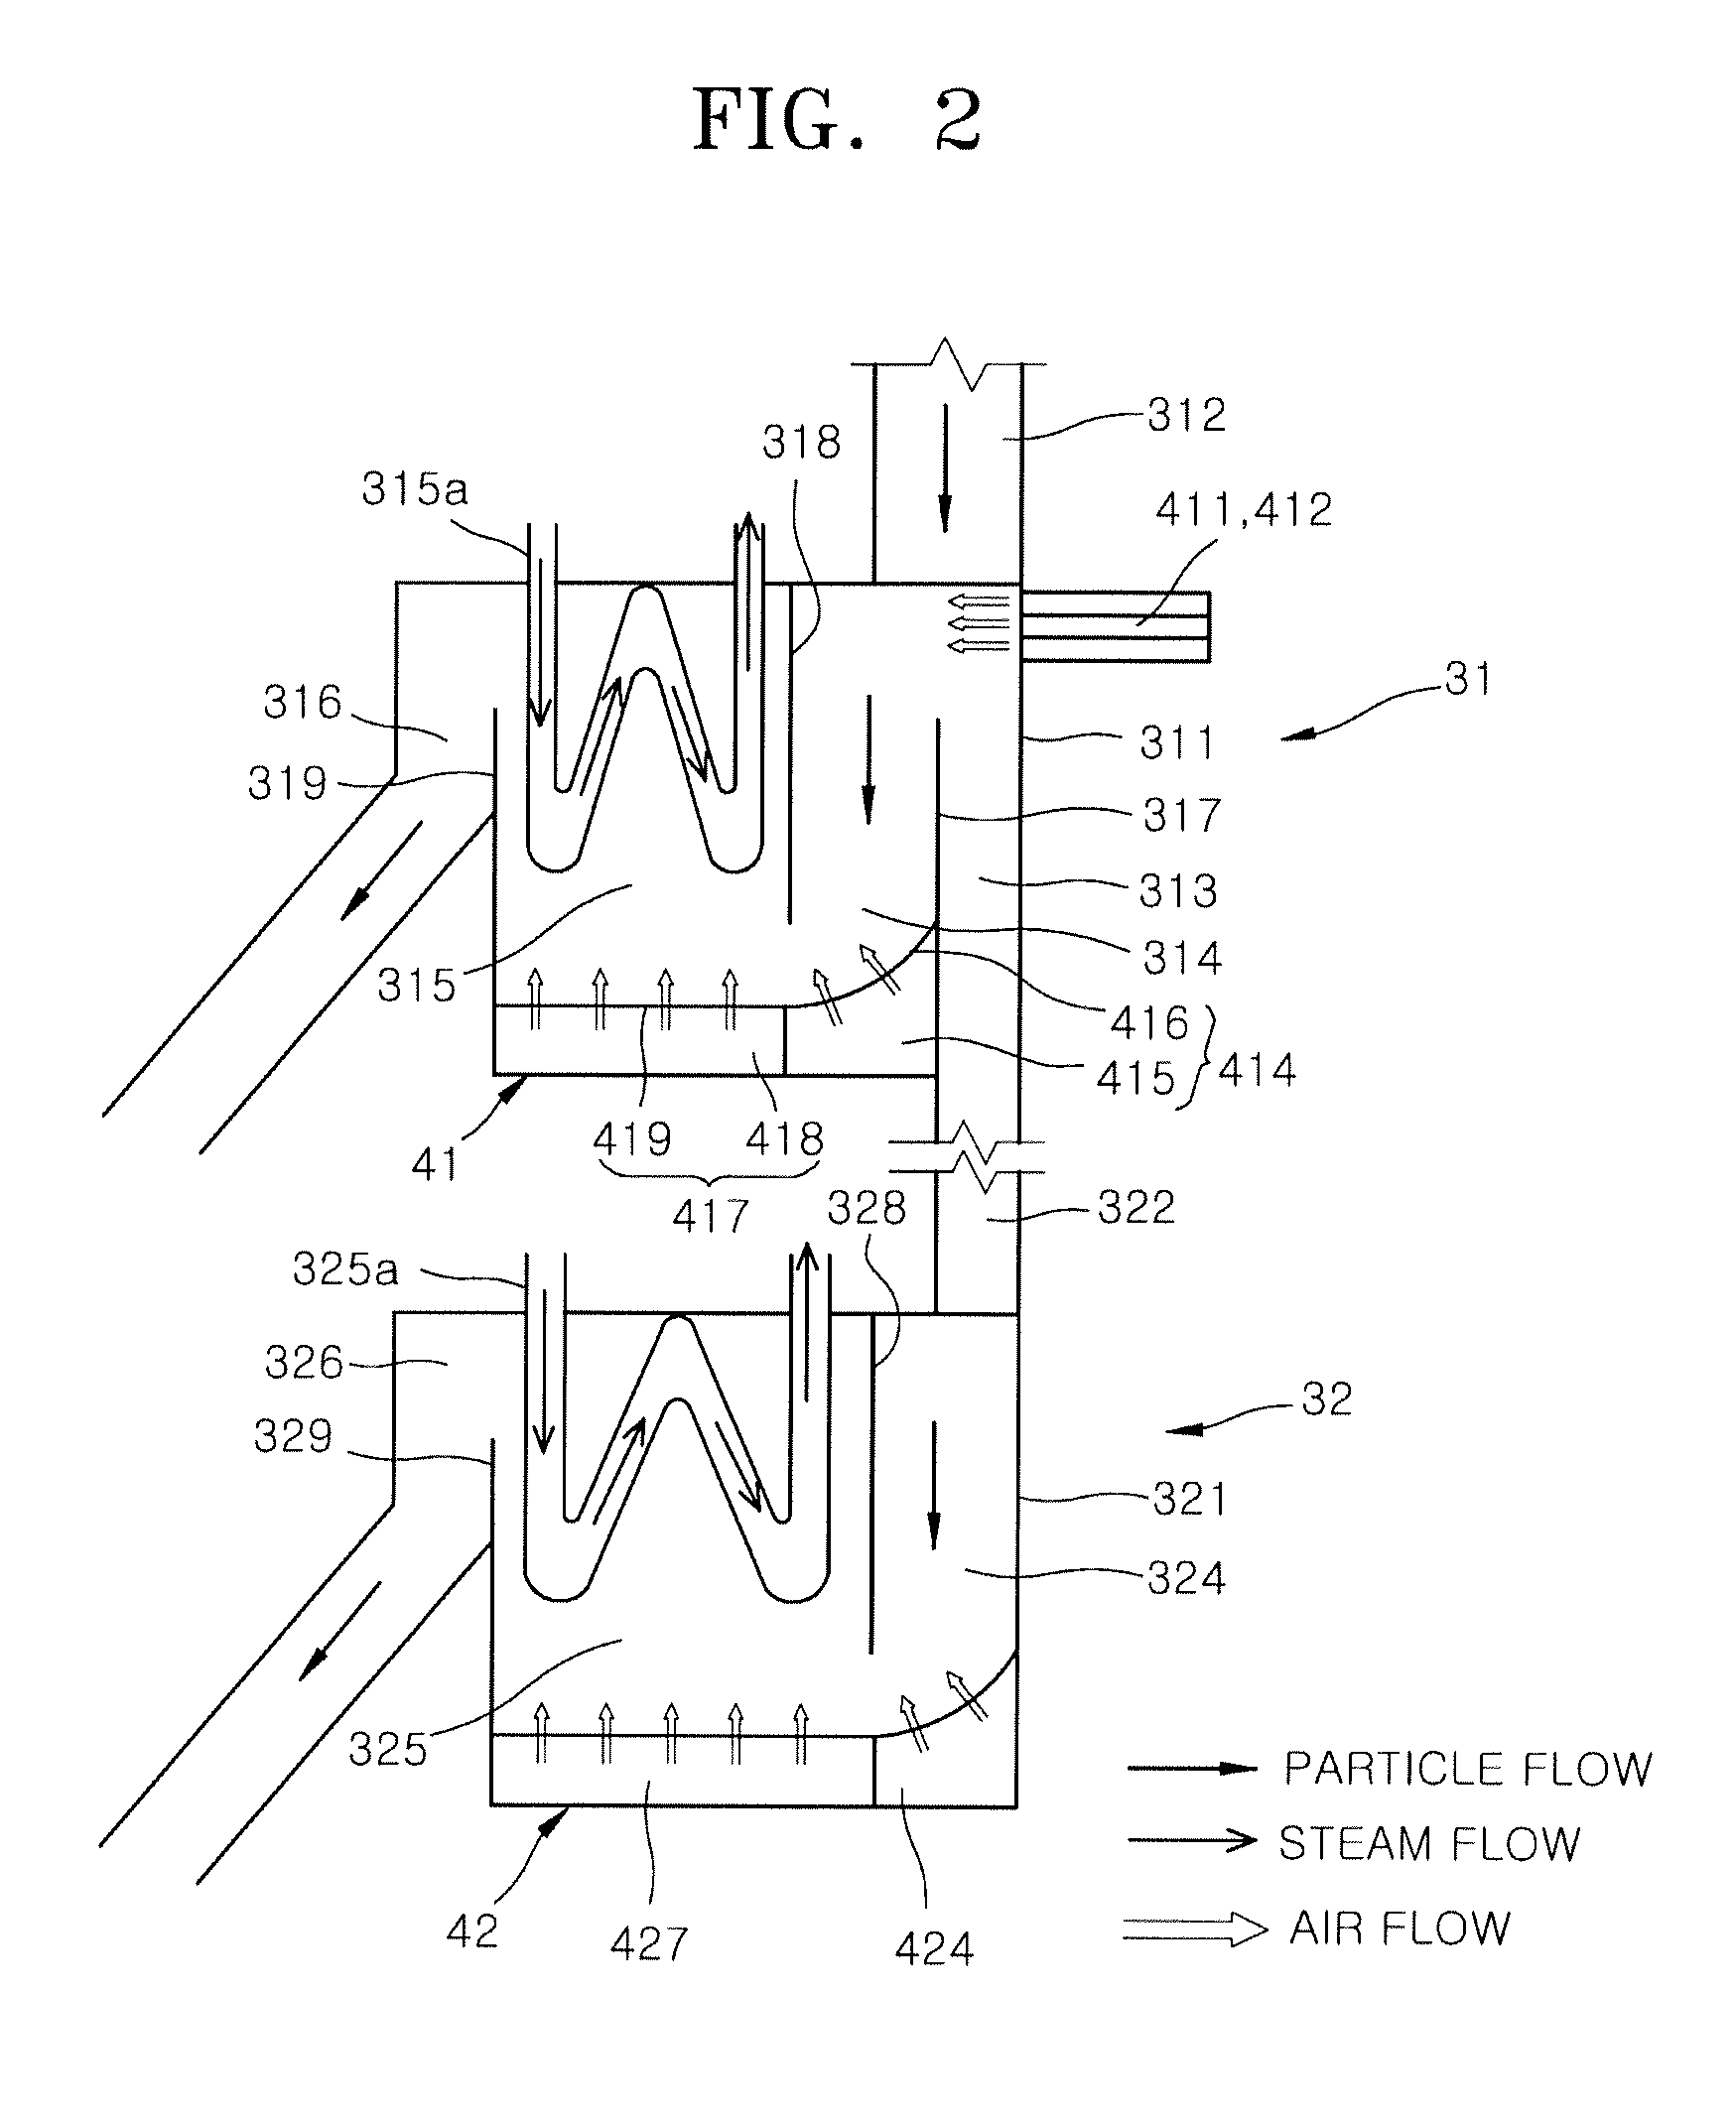 Heat exchange apparatus for circulating fluidized bed boilers